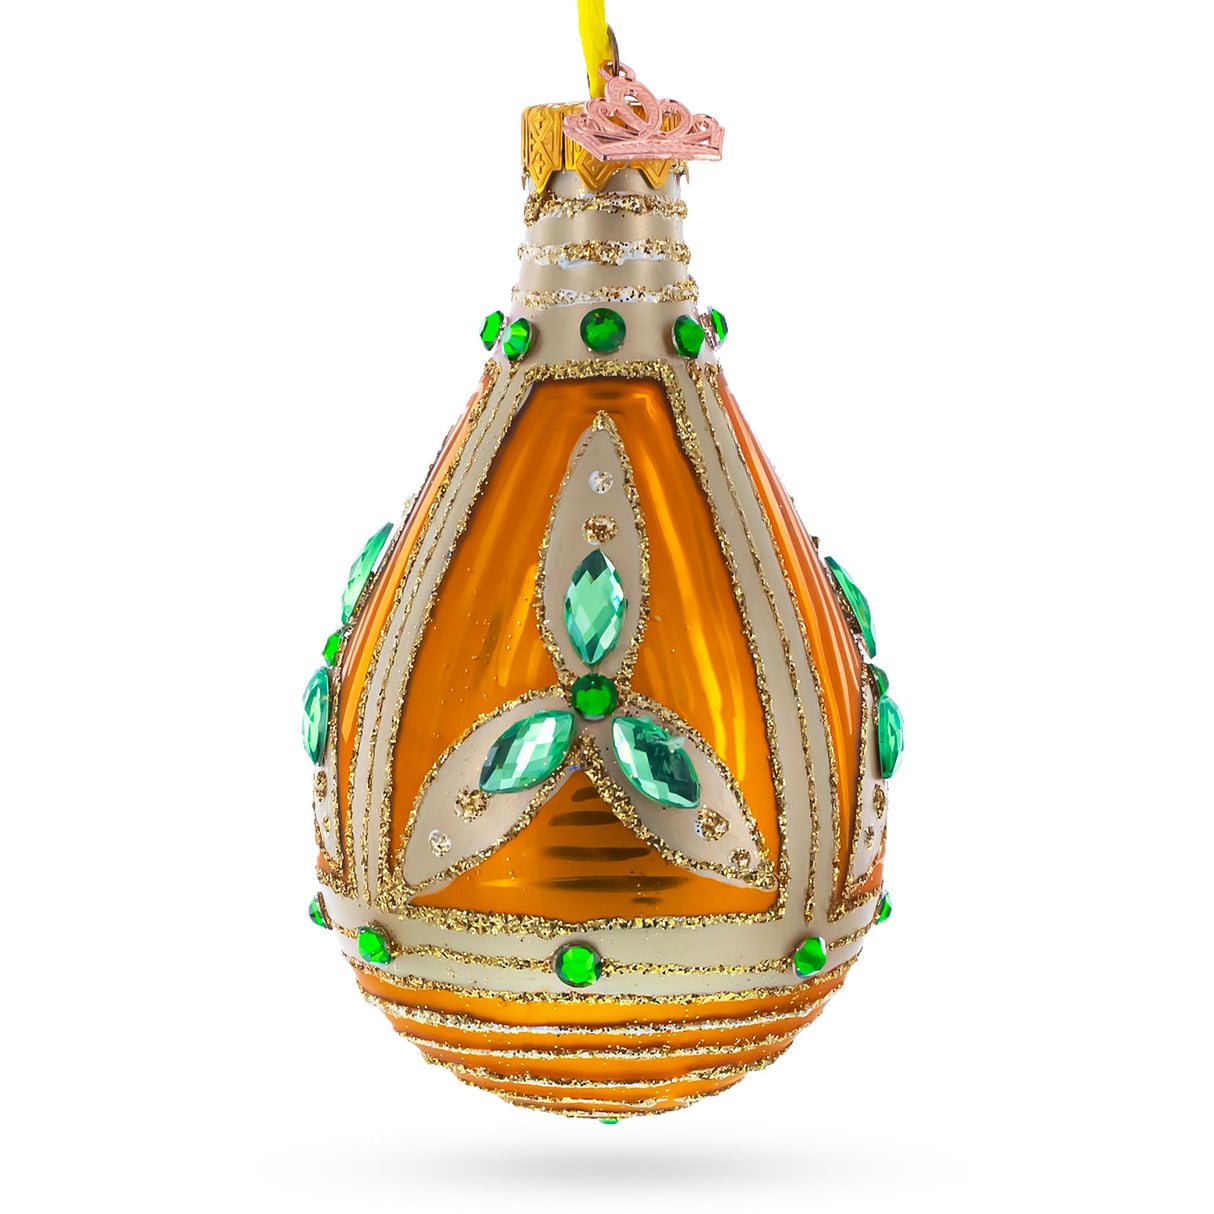 Glass Turquoise Jewels on Striped Gold Glass Waterdrop Finial Christmas Ornament in Orange color